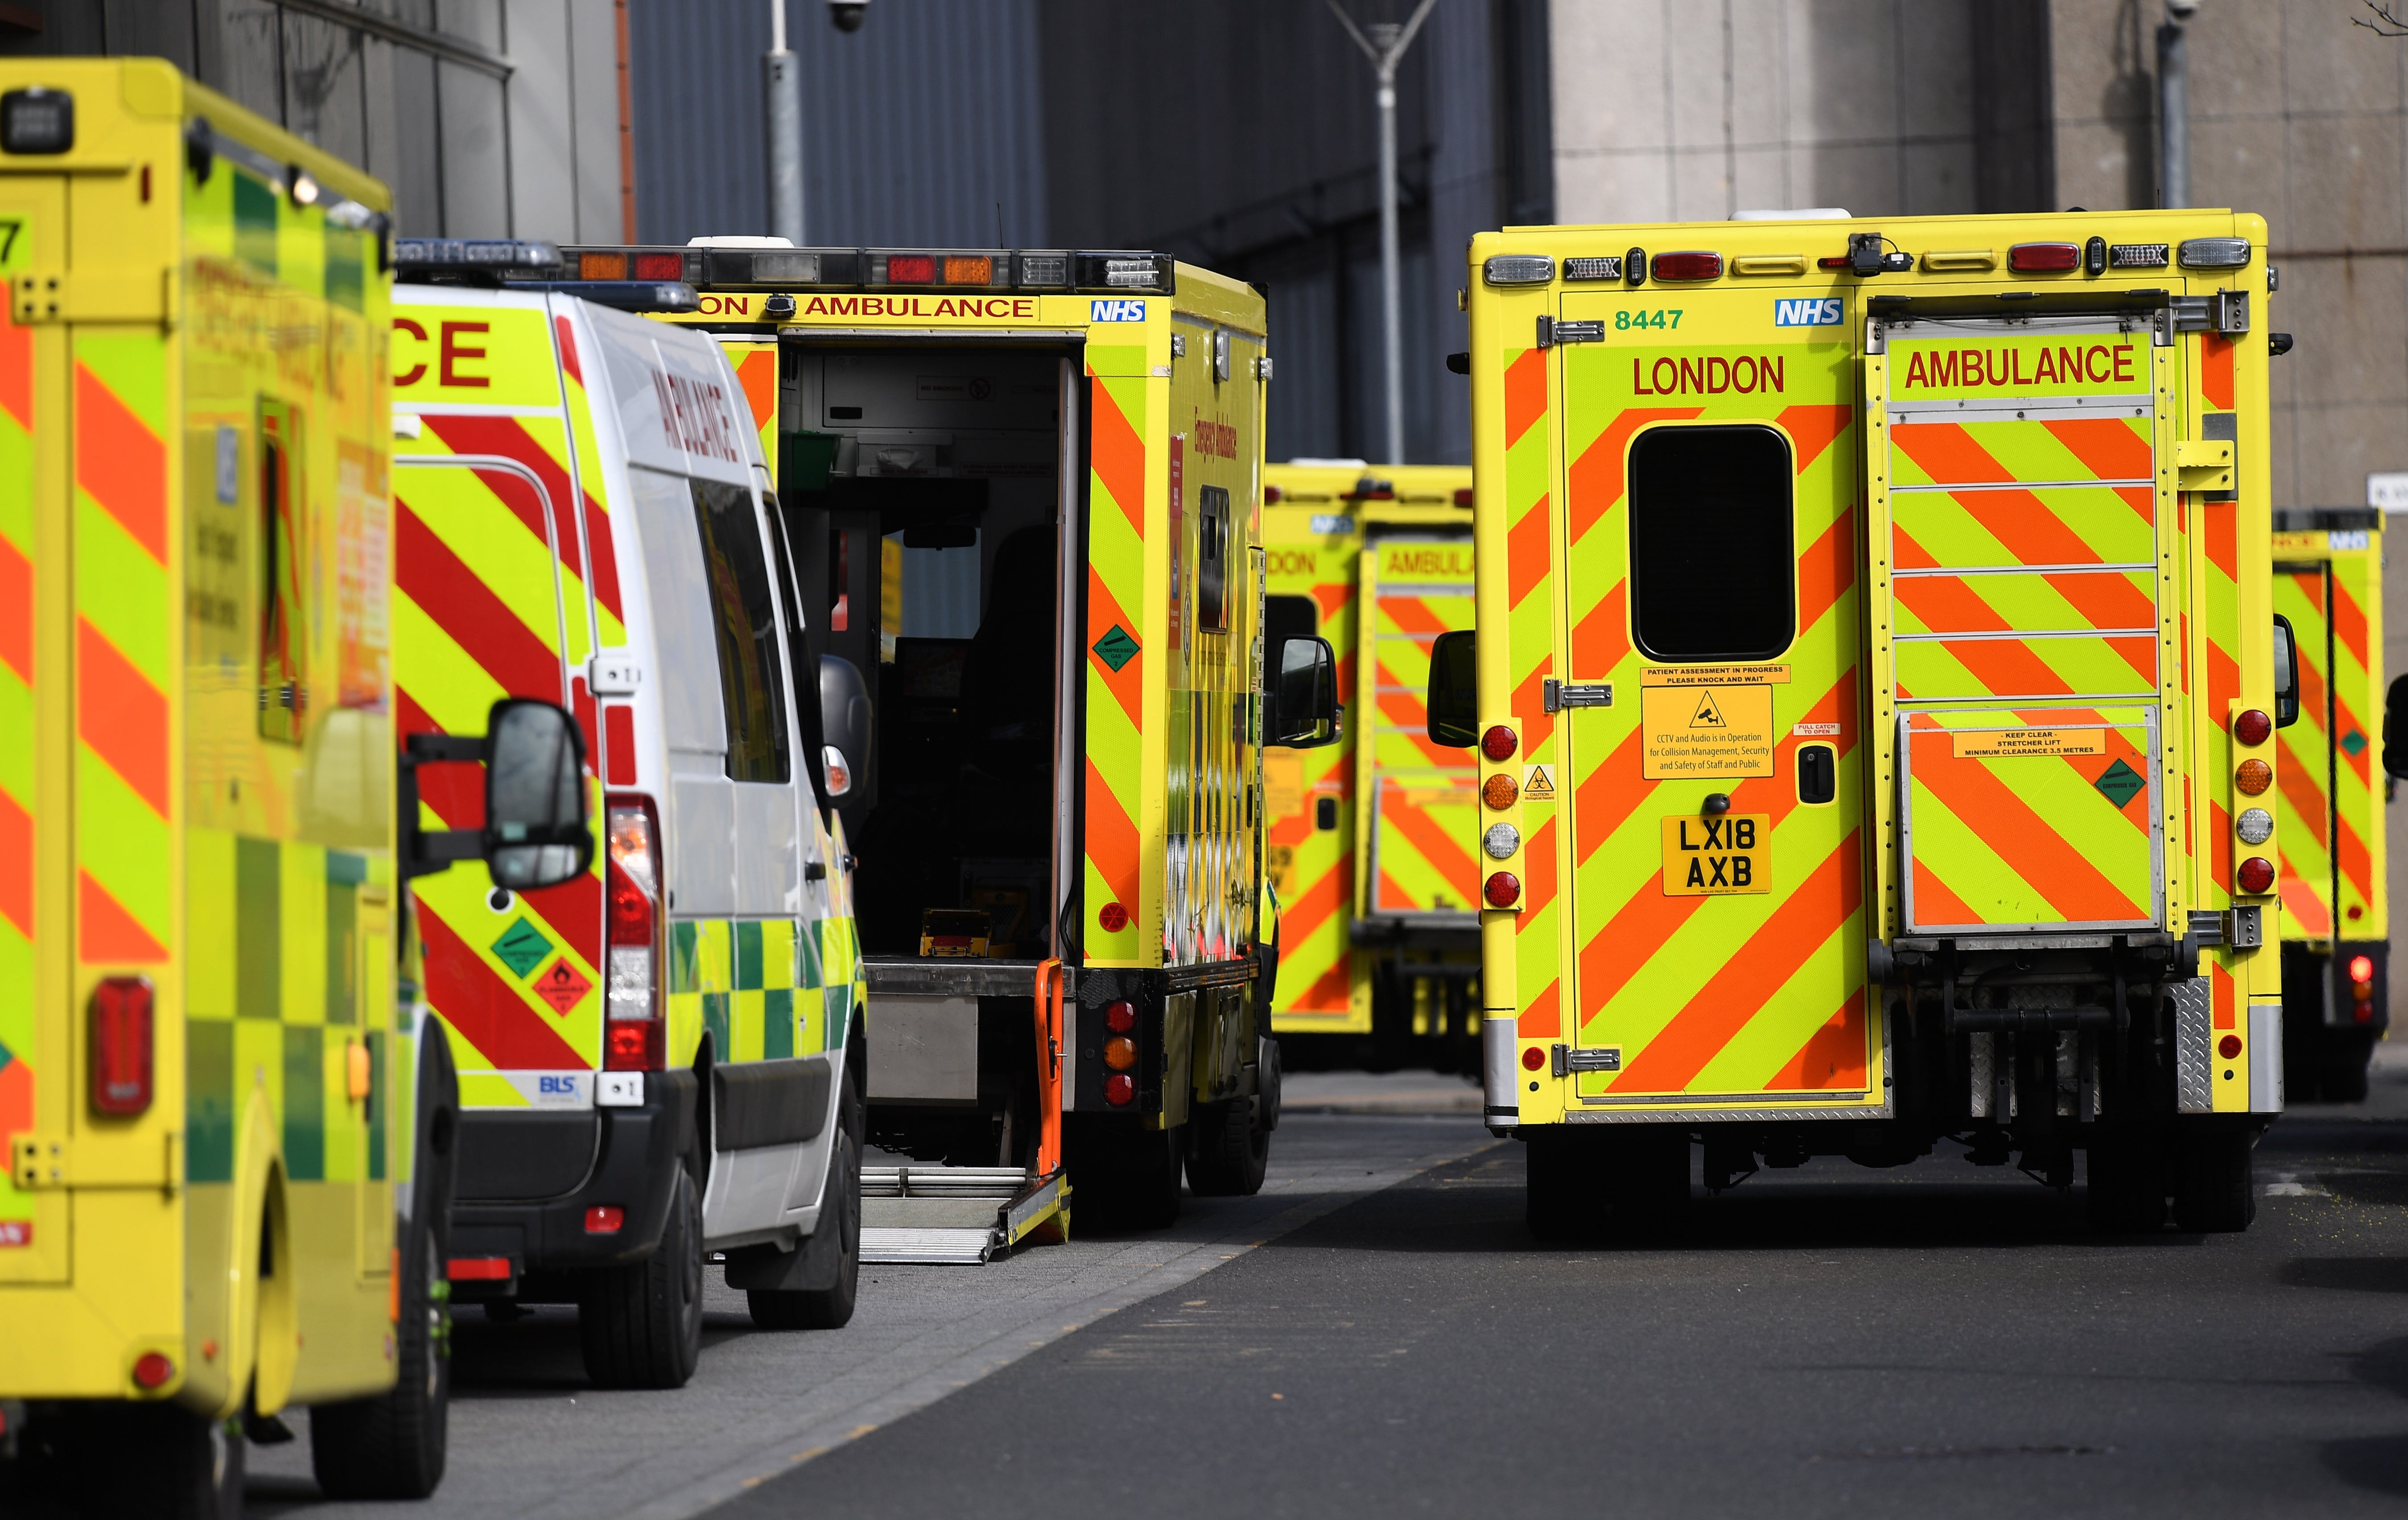 Emergency services are likely to be operating at the highest alert level until the end of July